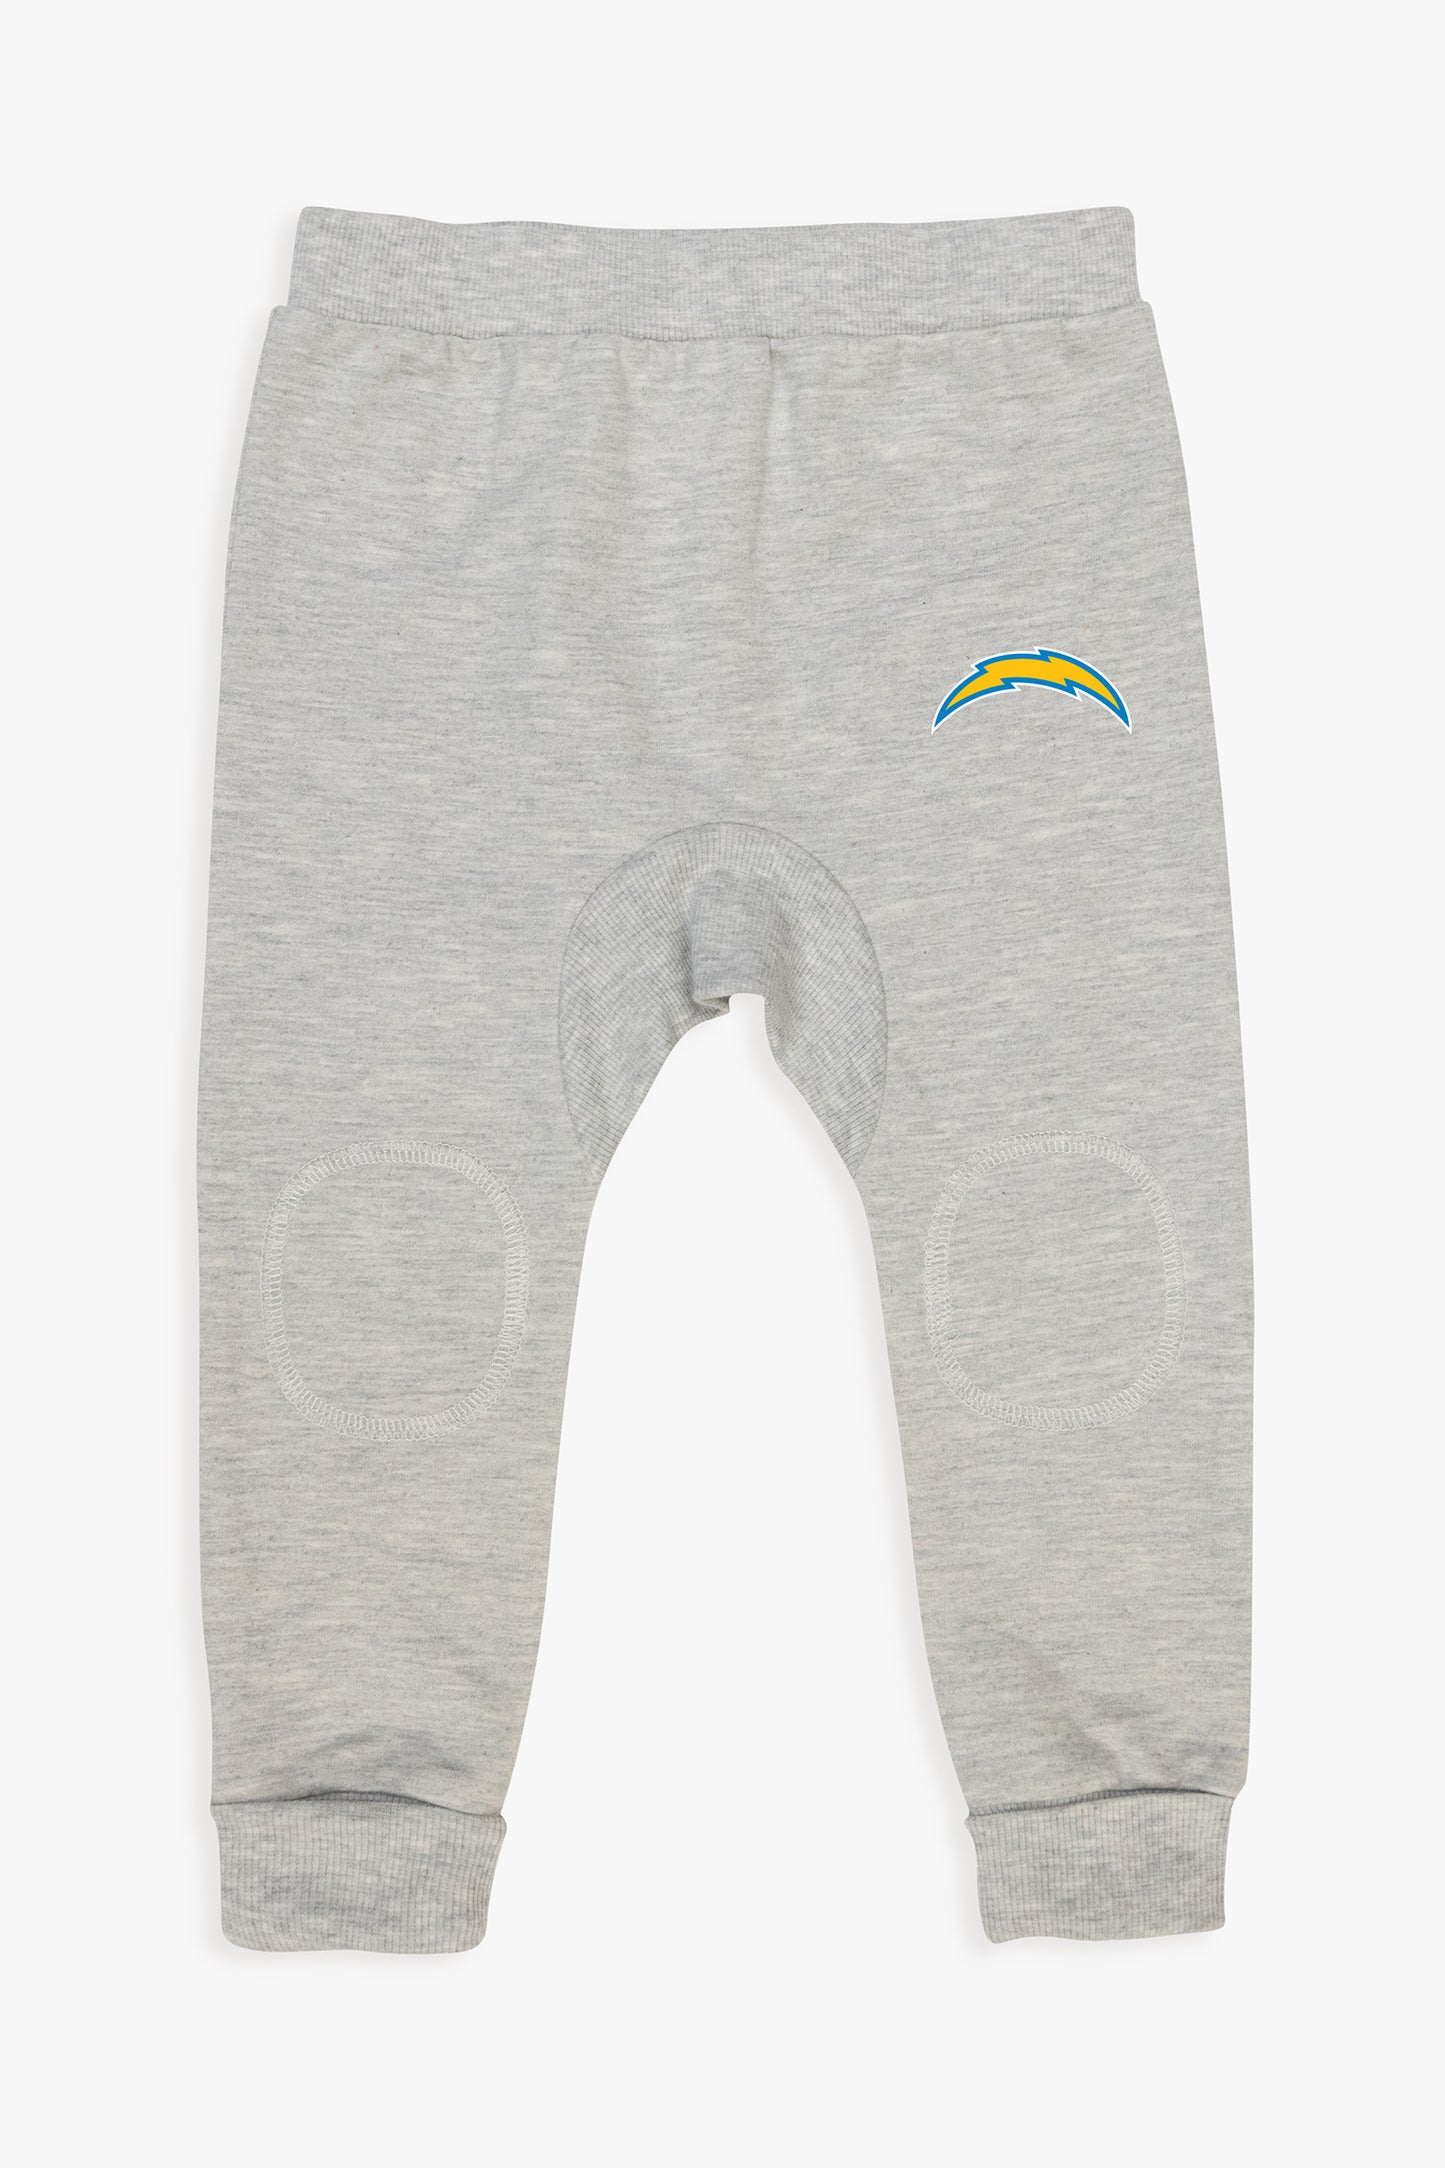 Gertex NFL Baby Grey French Terry Pants